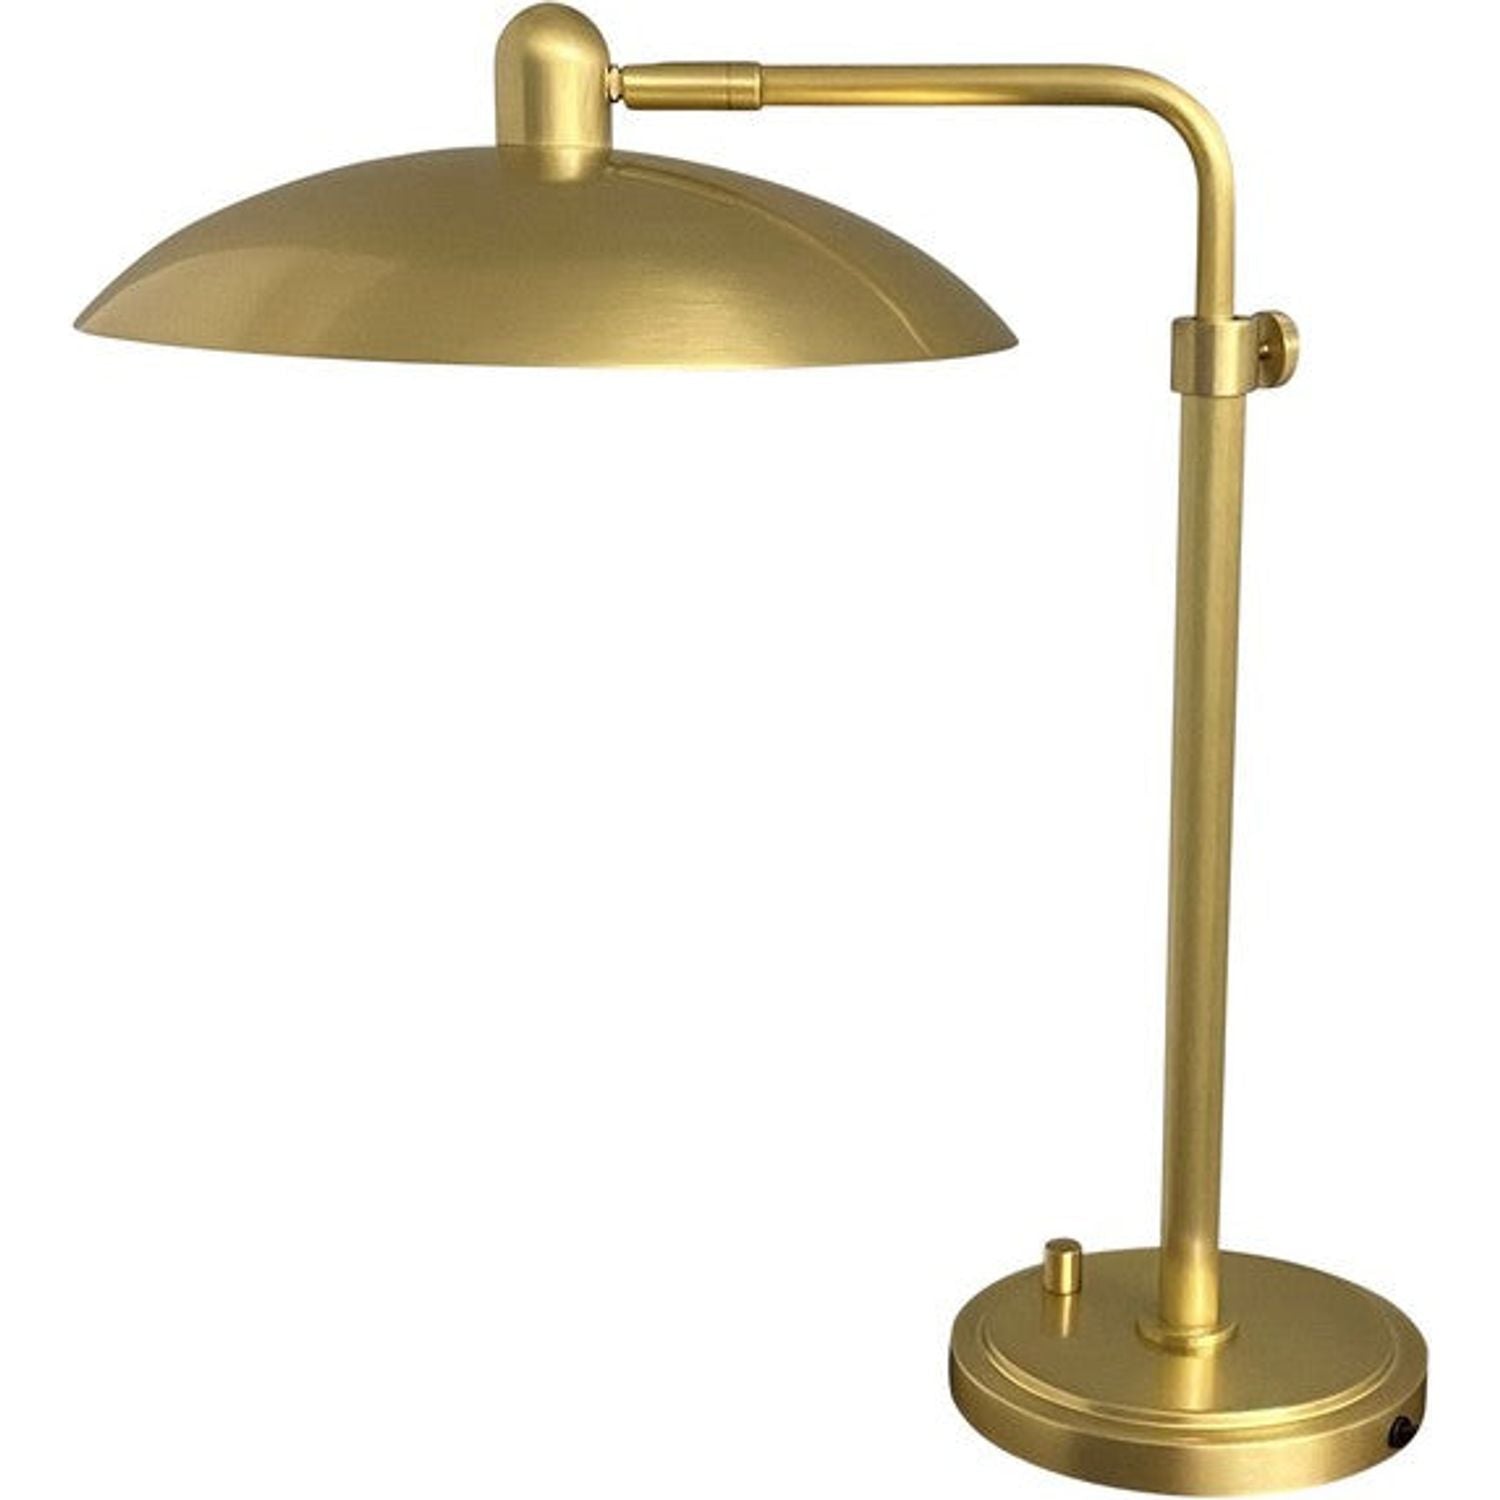 House of Troy - RL250-NTB - LED Table Lamp - Ridgeline - Natural Brass